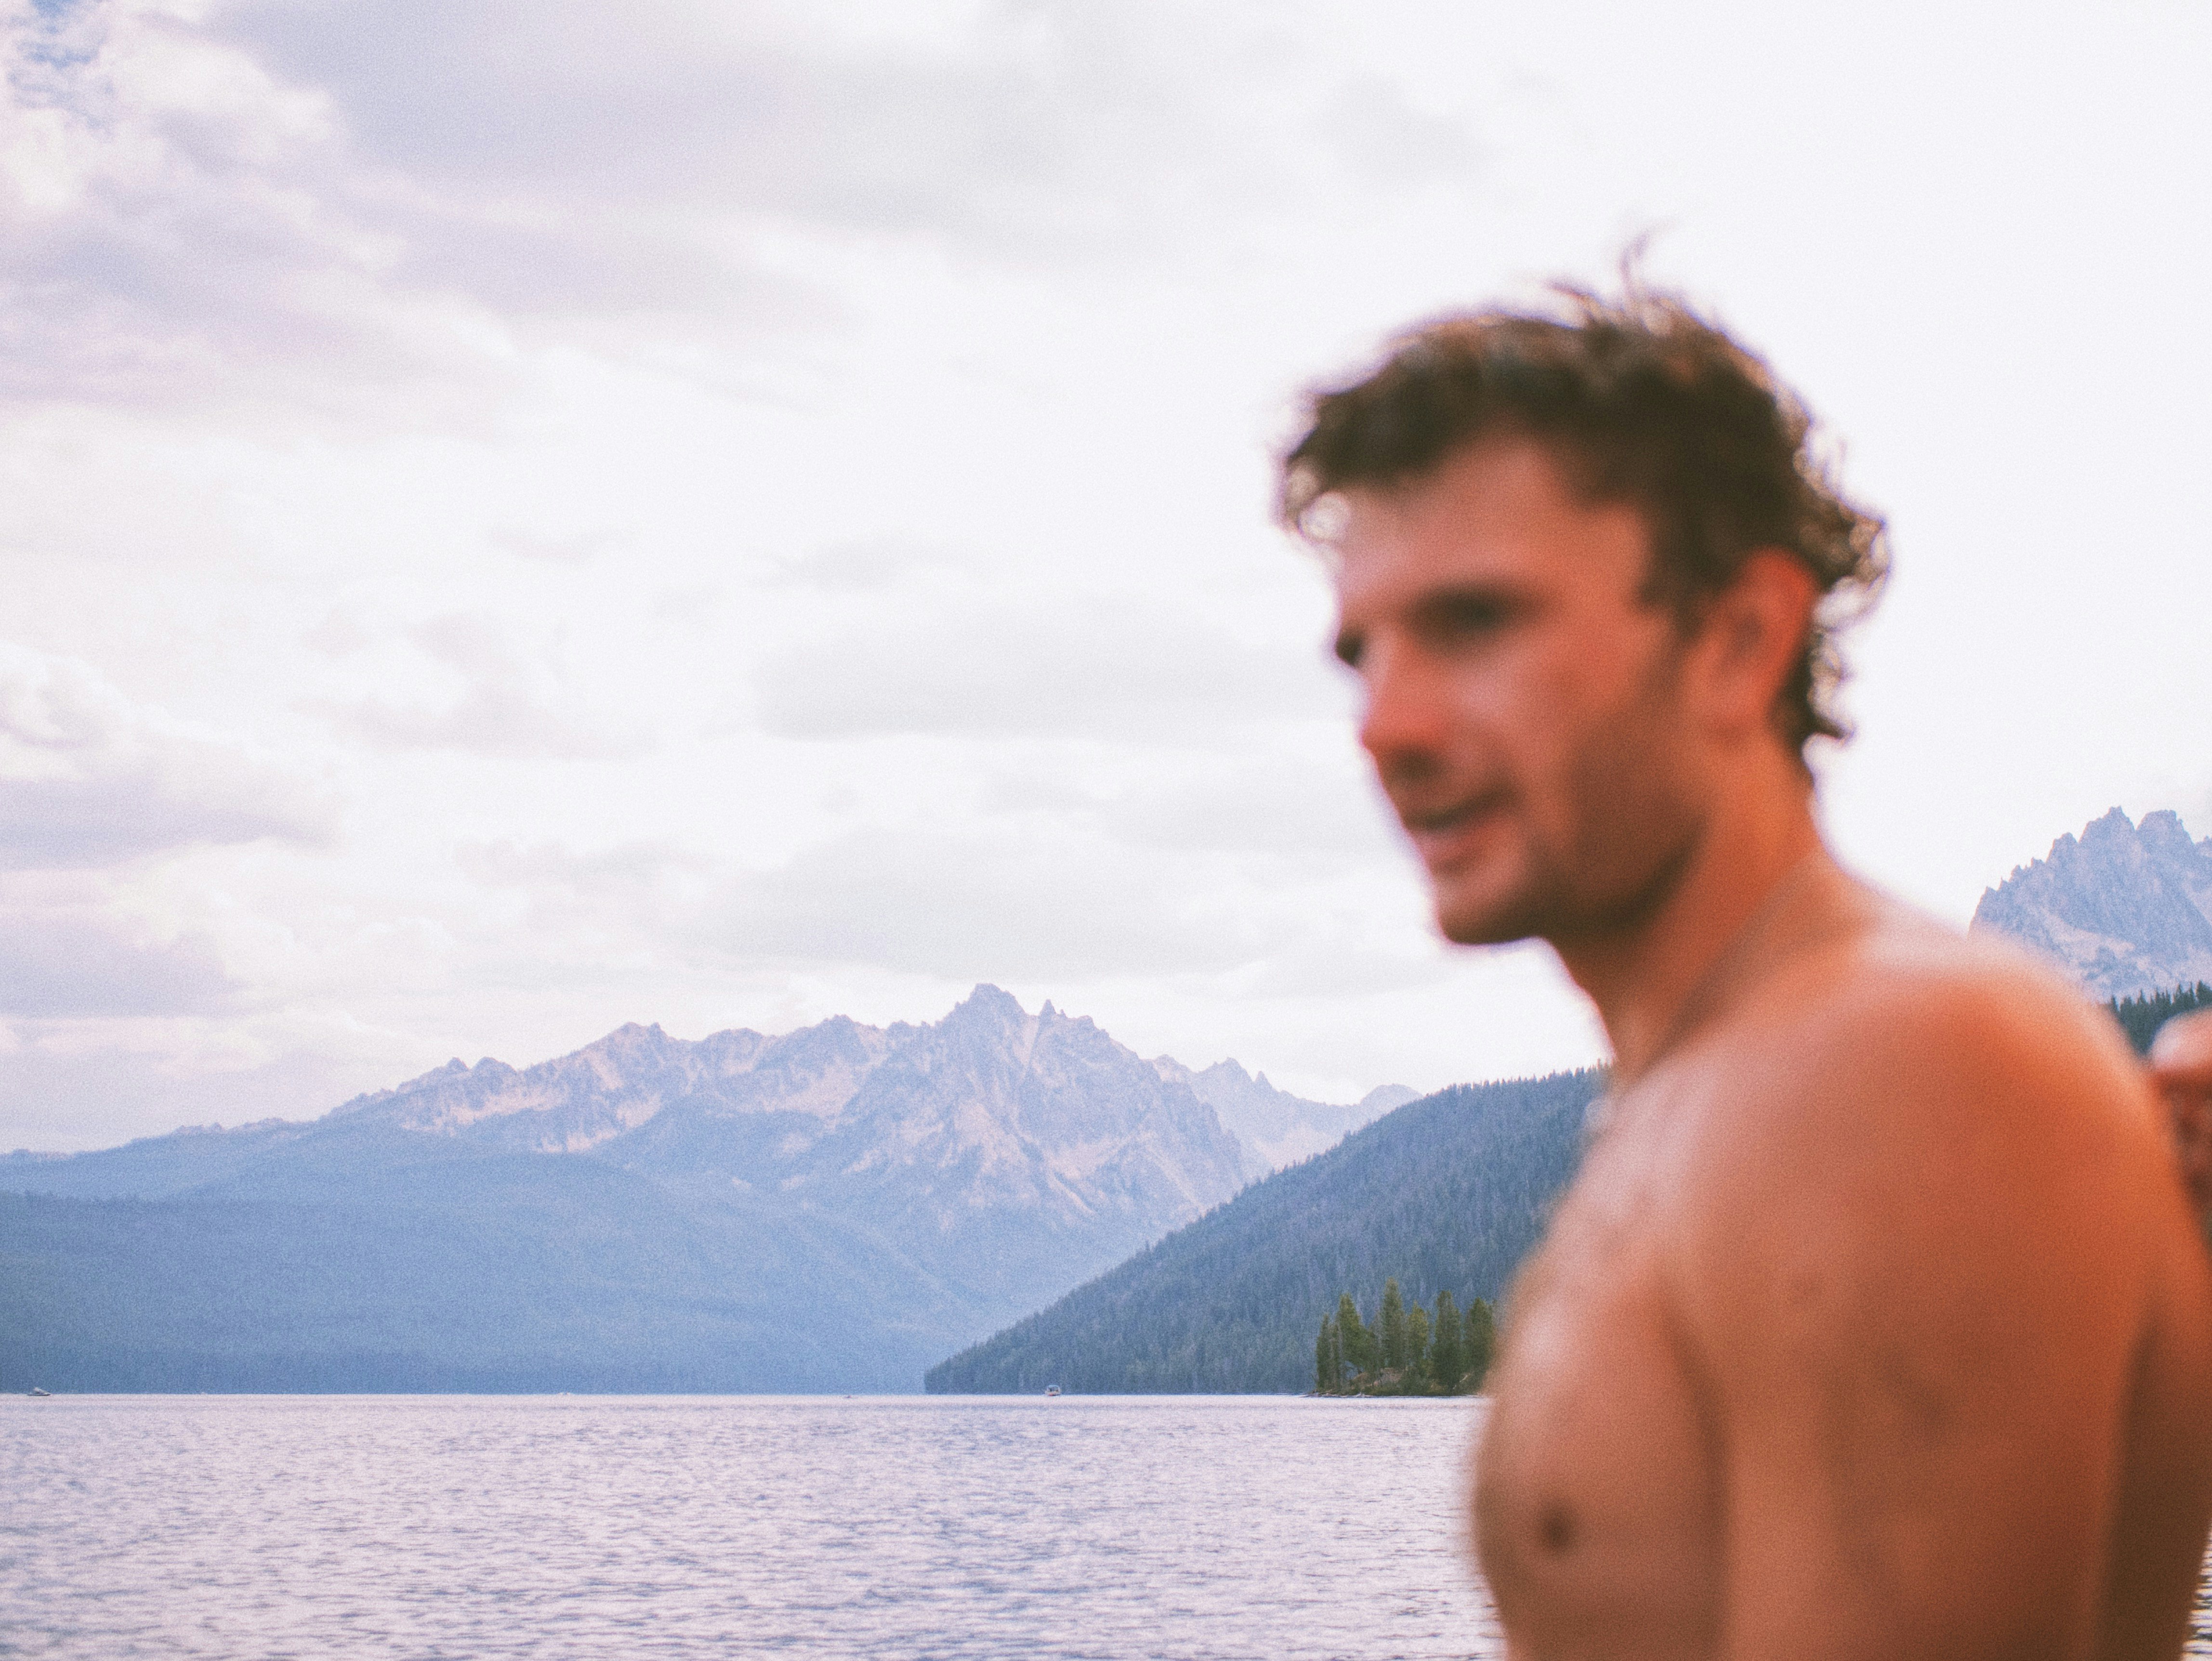 topless man standing near body of water during daytime